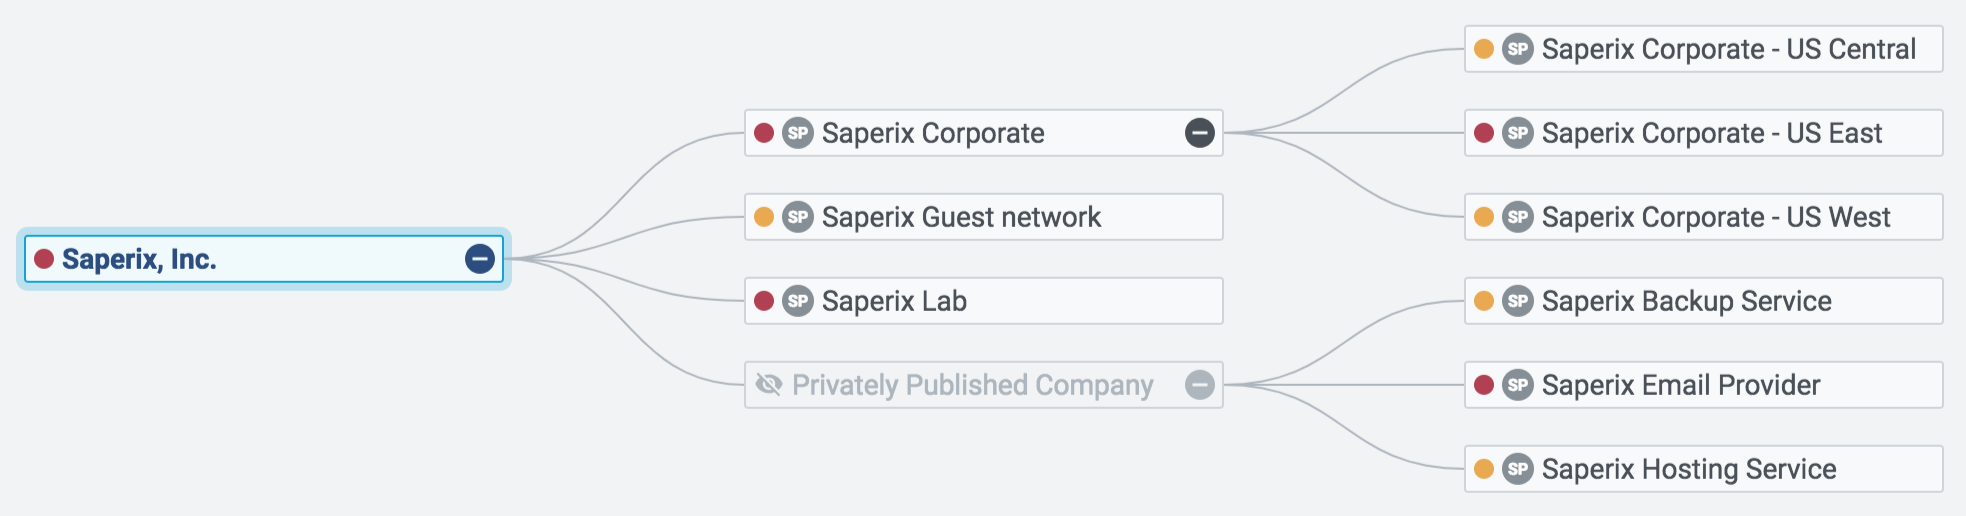 The Saperix Ratings Tree